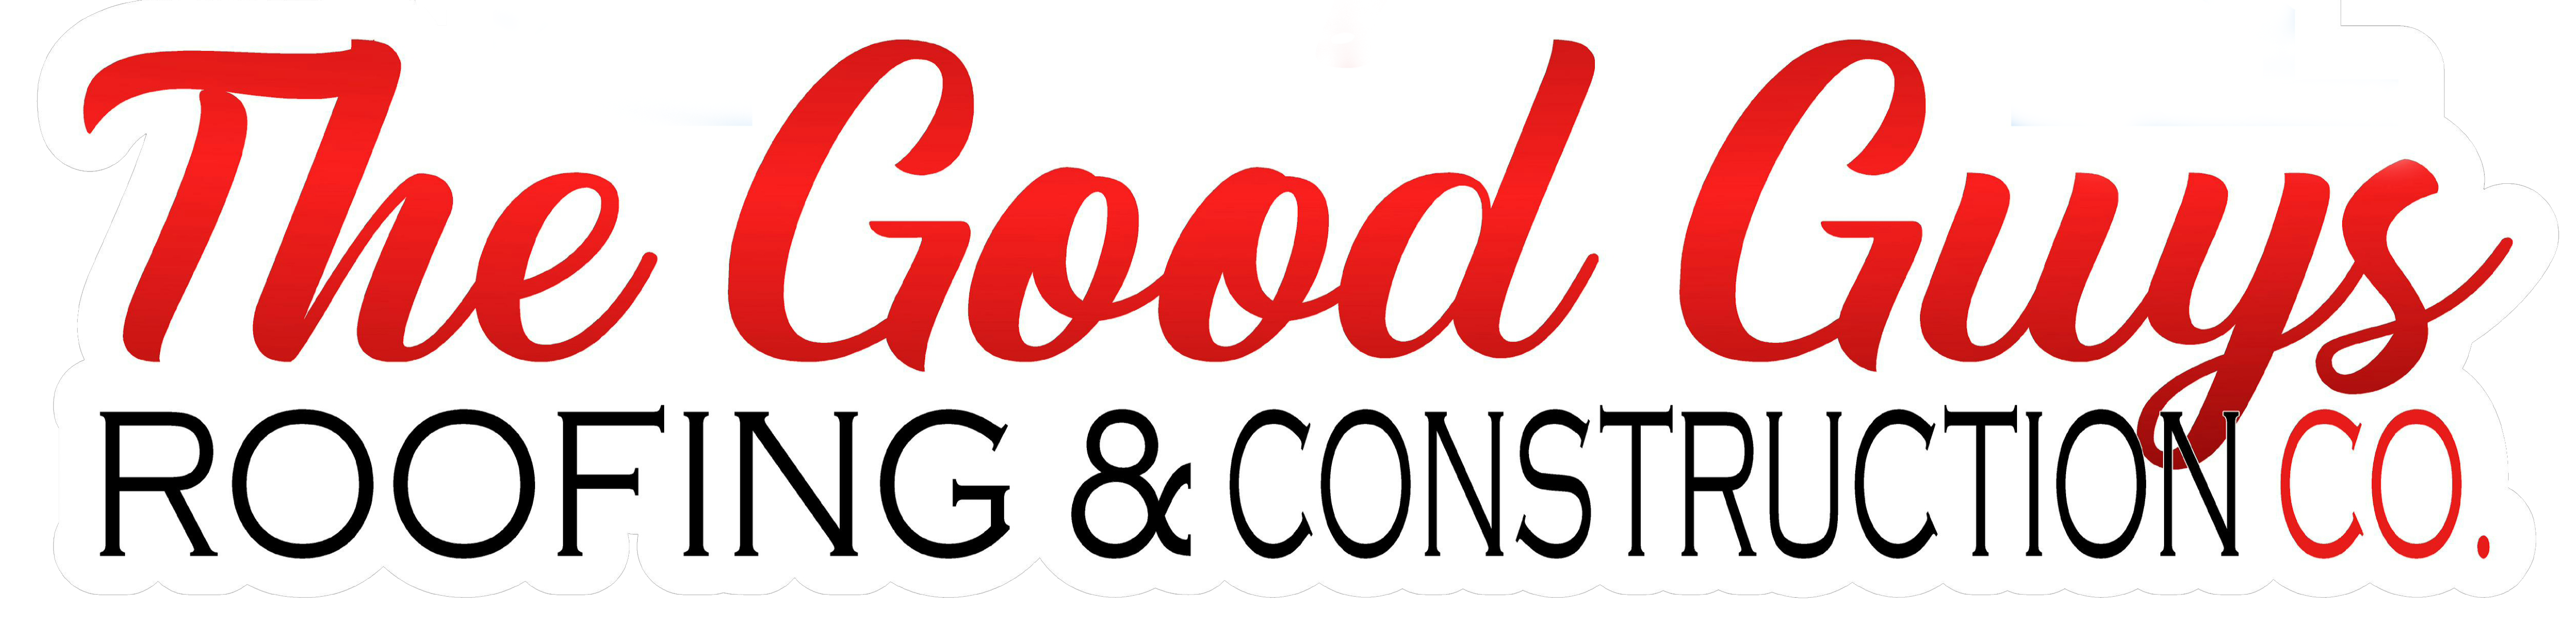 The Good Guys Roofing and Construction CO logo